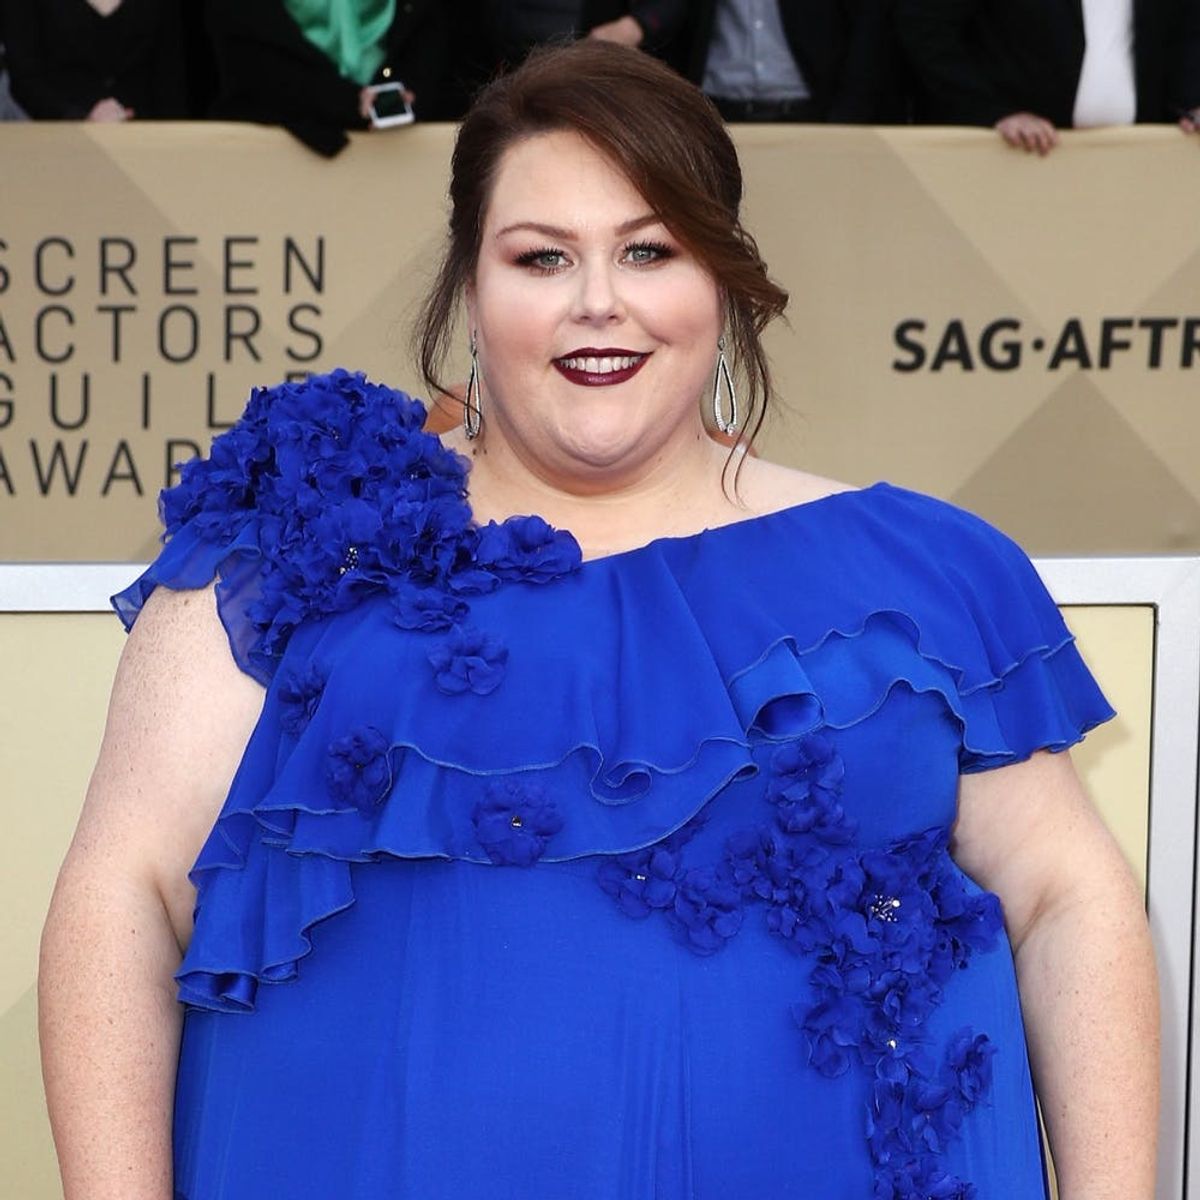 ‘This Is Us’ Star Chrissy Metz Just Landed Her First Feature Film Starring Role